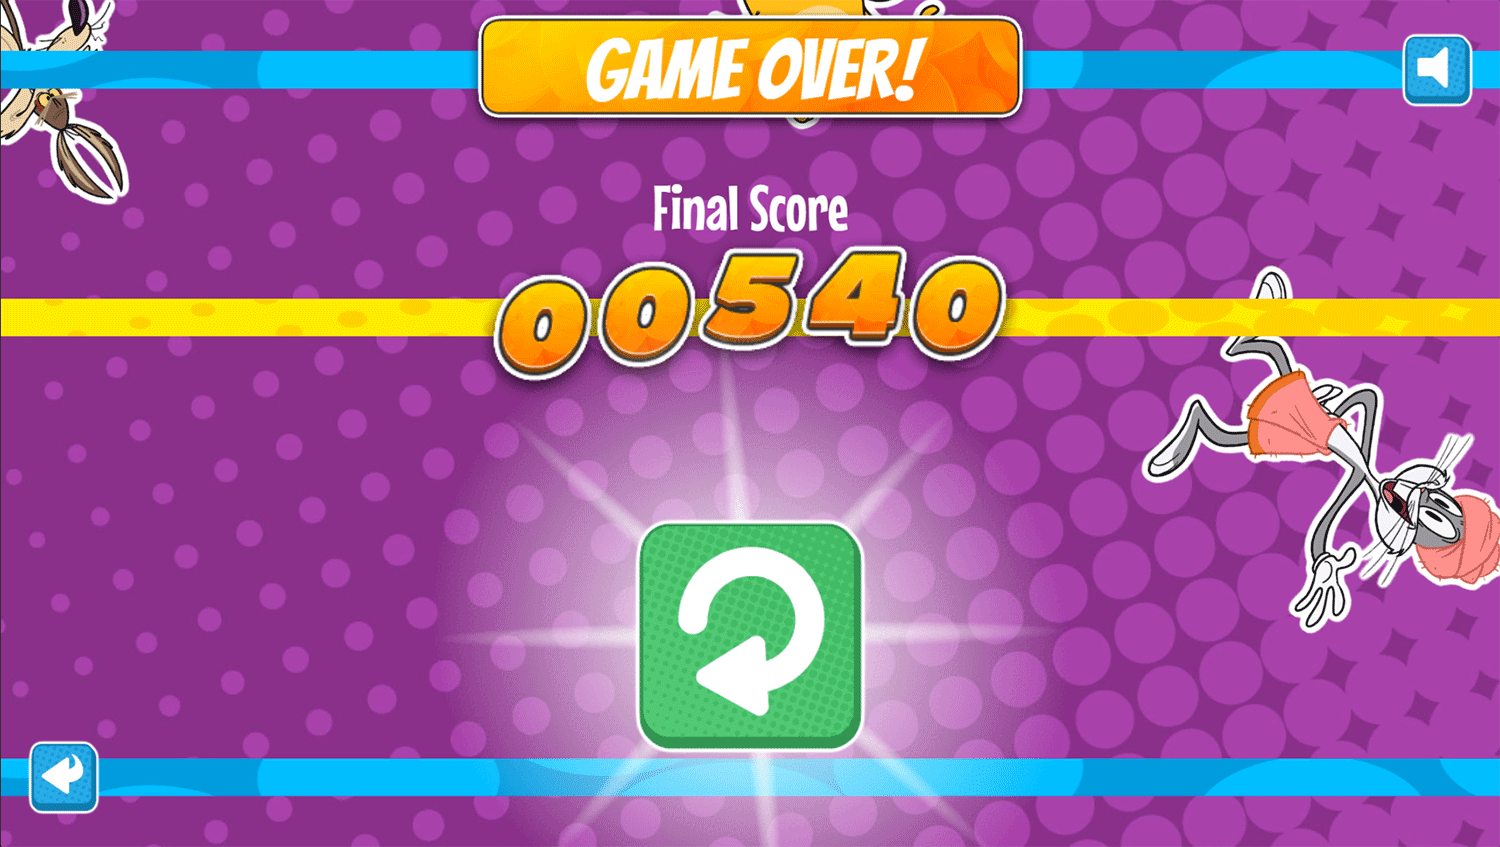 New Looney Tunes Find It Game Game Over Screenshot.